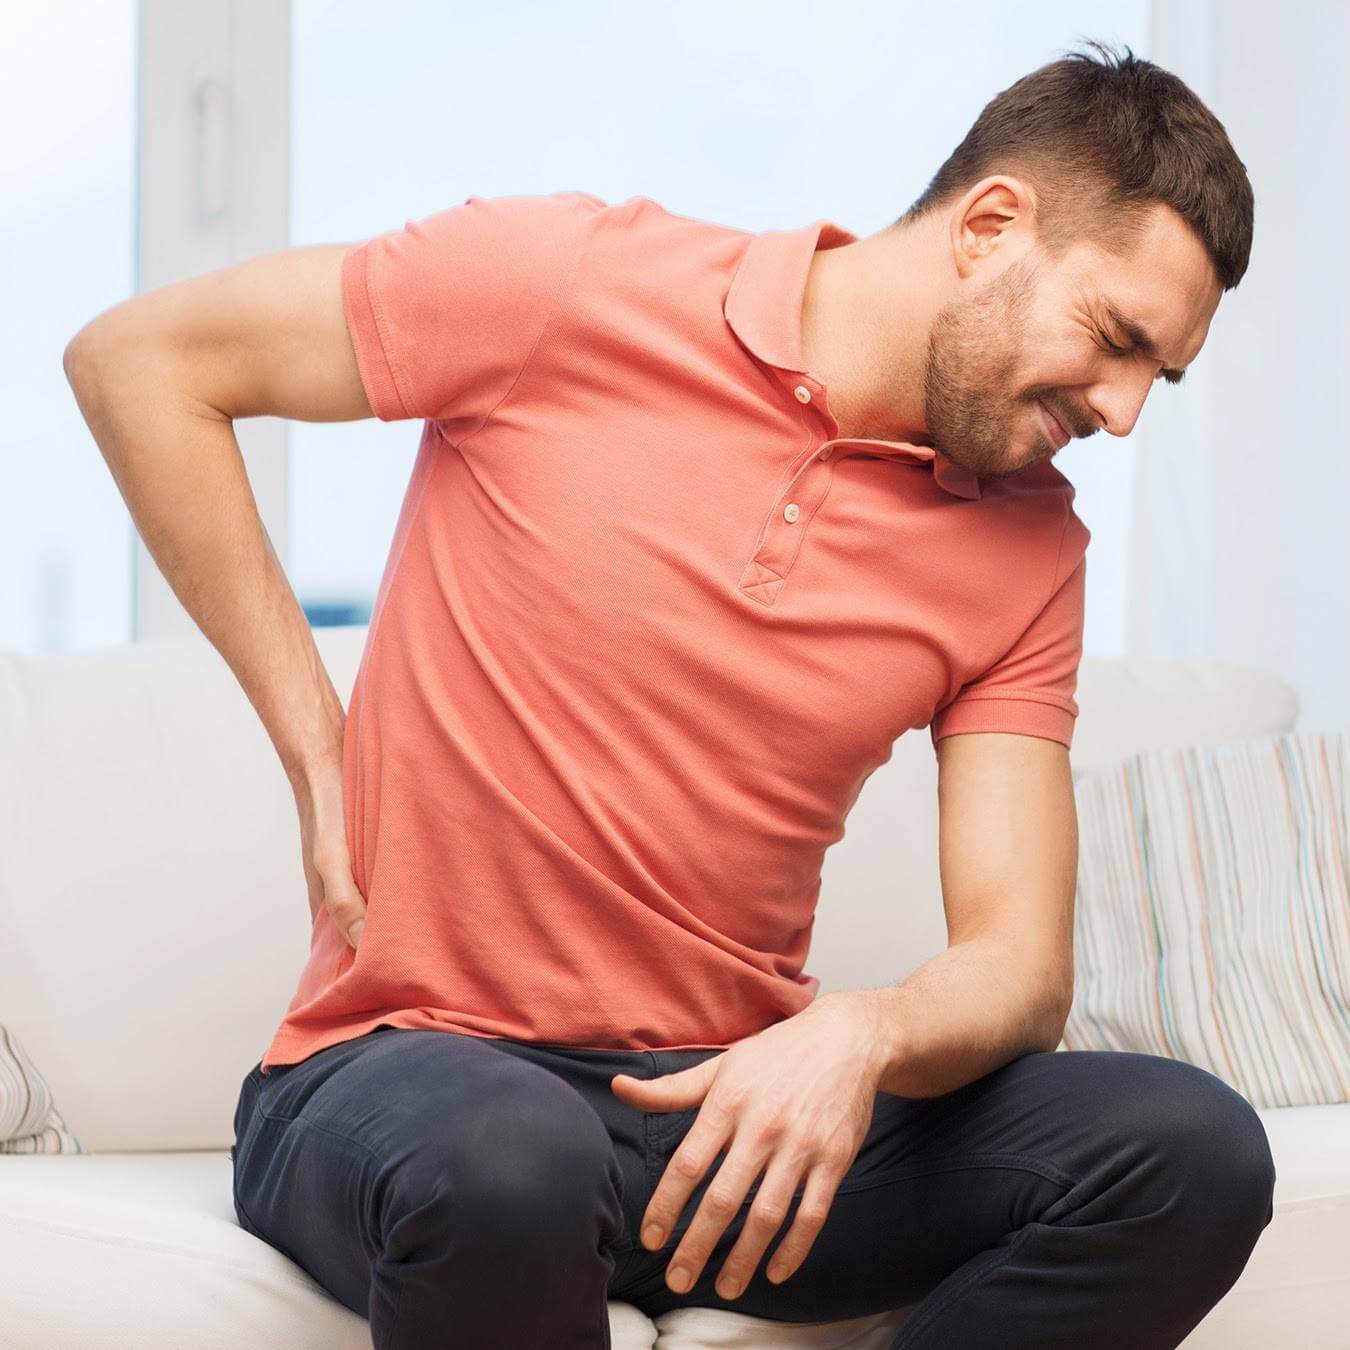 treatment for back pain in Charlotte NC